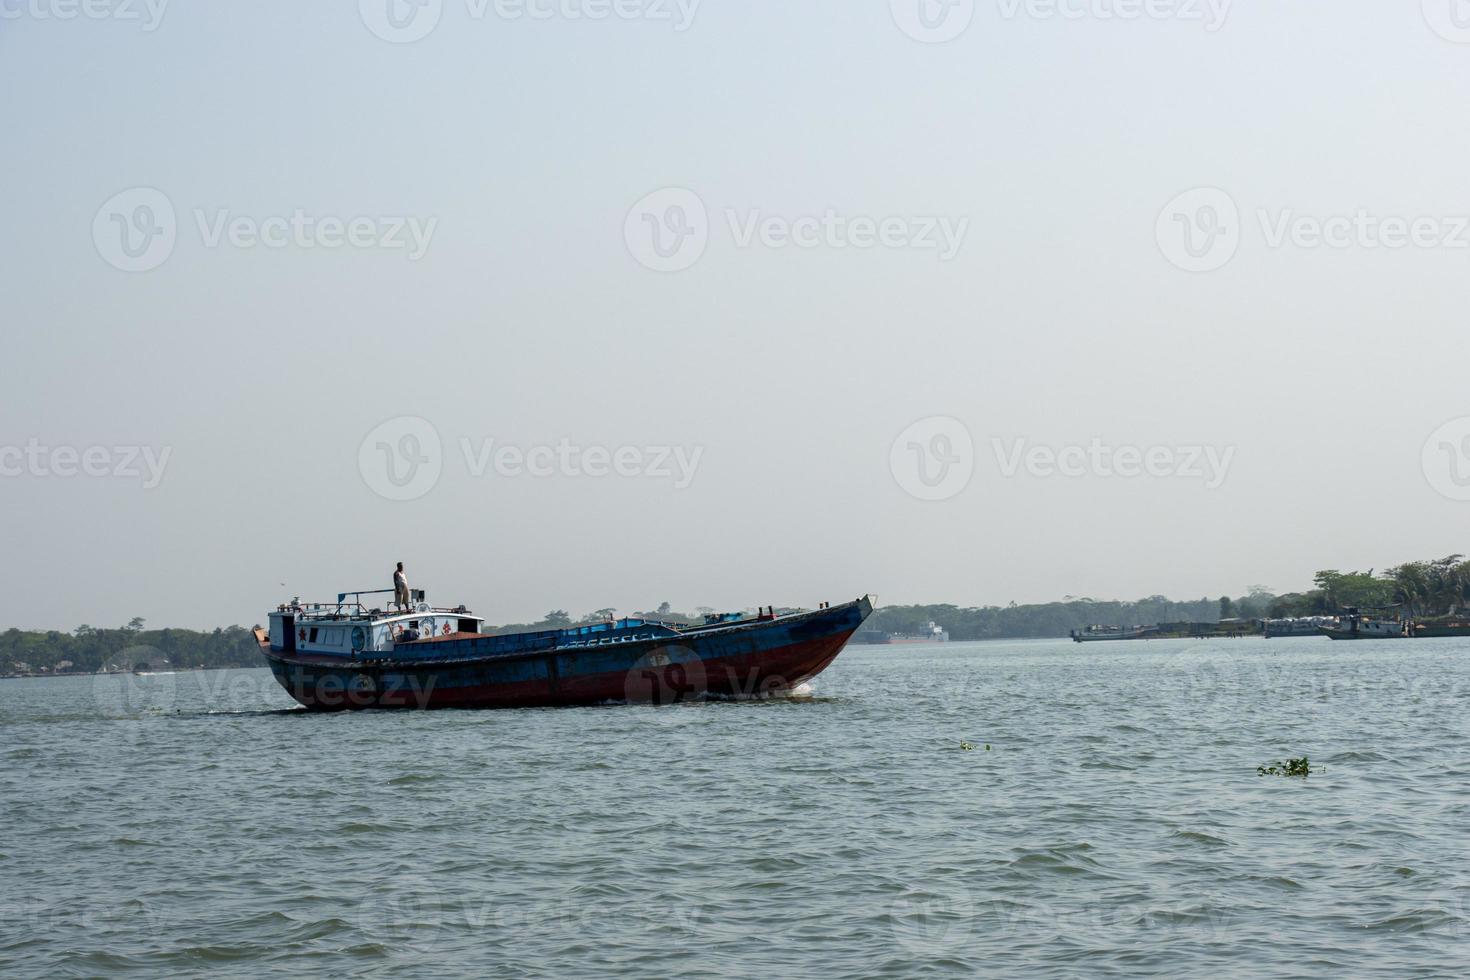 Troller boat on the river delivering goods close-up photo. Beautiful rural area and water vessel transportation. Beautiful sky and river horizon scenery with a motorboat. Restless river and blue sky. photo